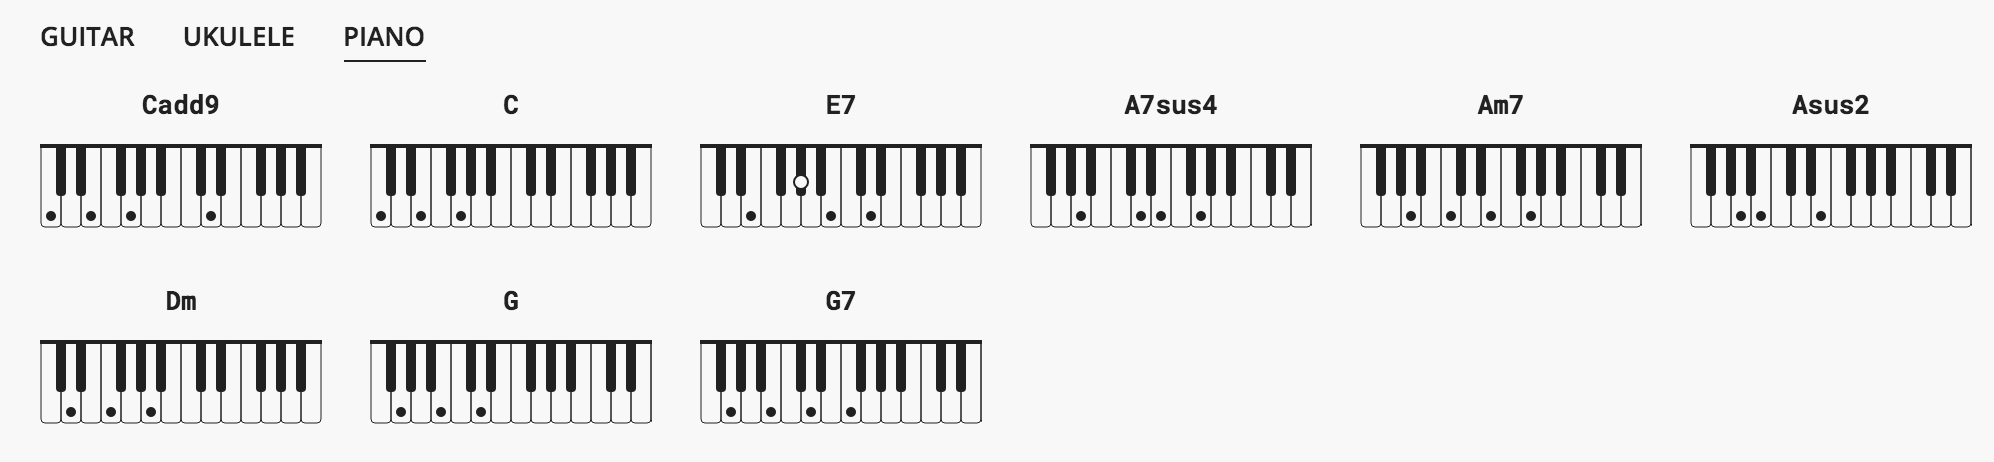 piano chords from guitar